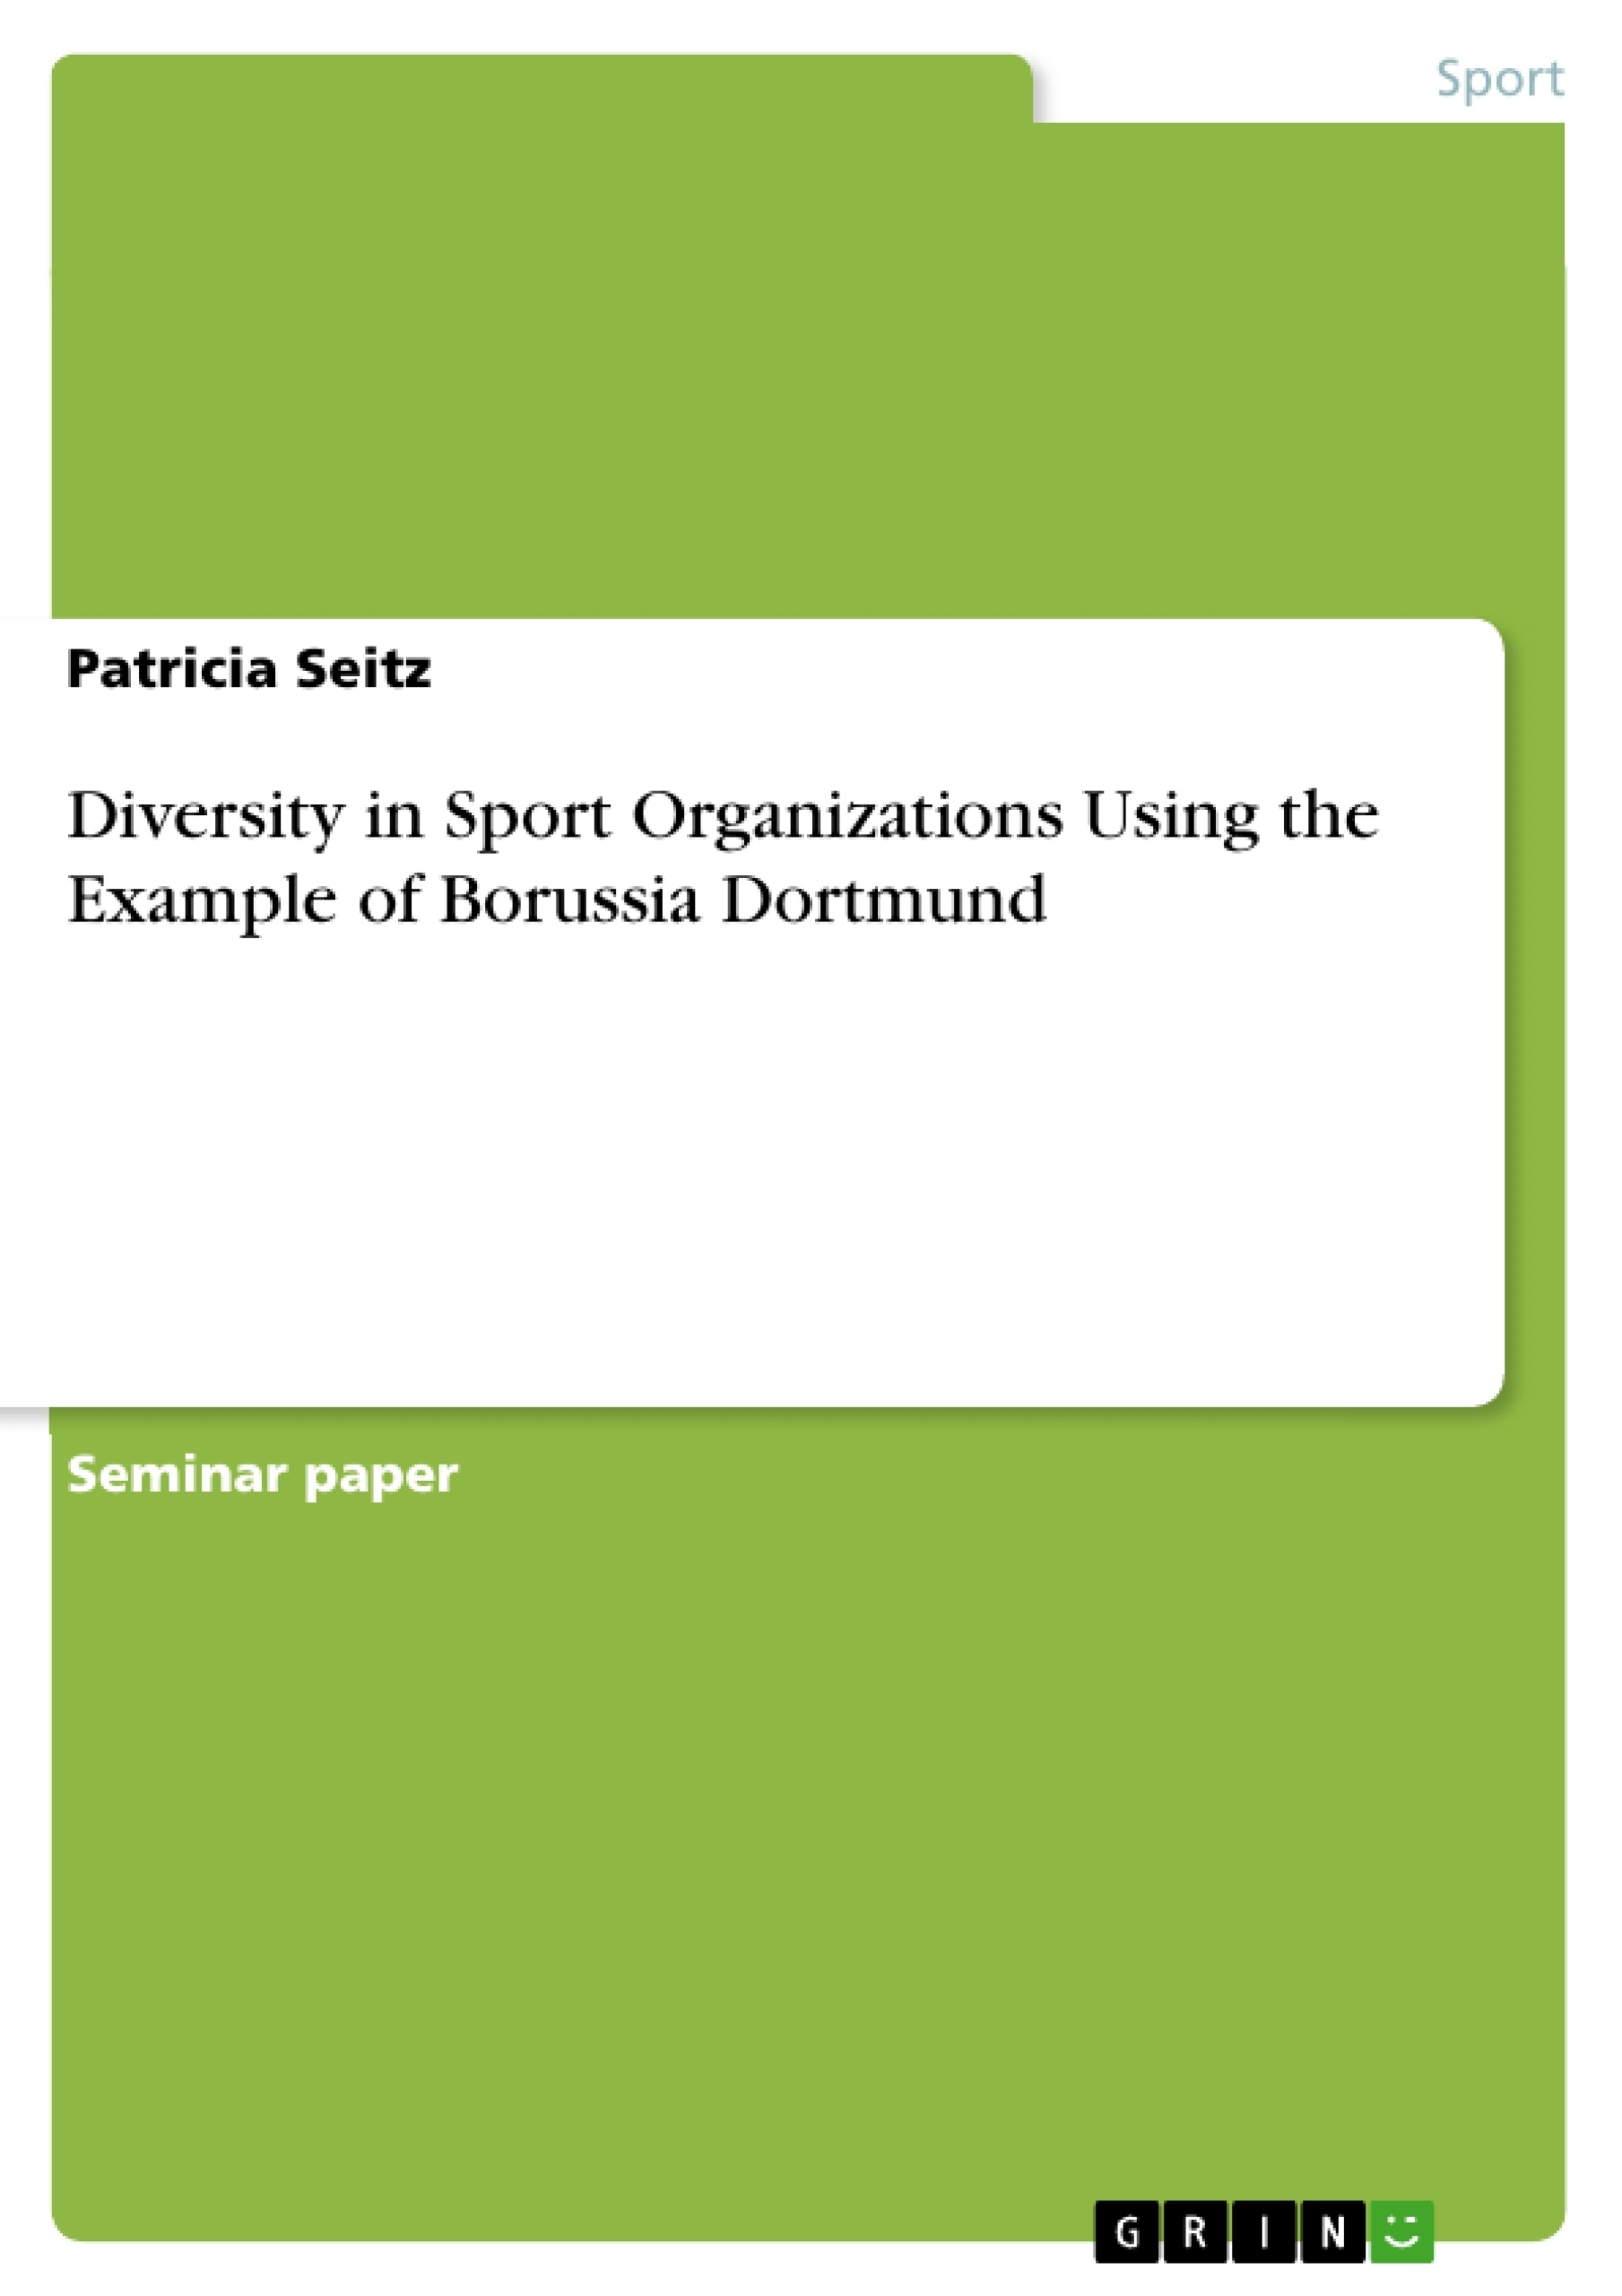 Title: Diversity in Sport Organizations Using the Example of Borussia Dortmund